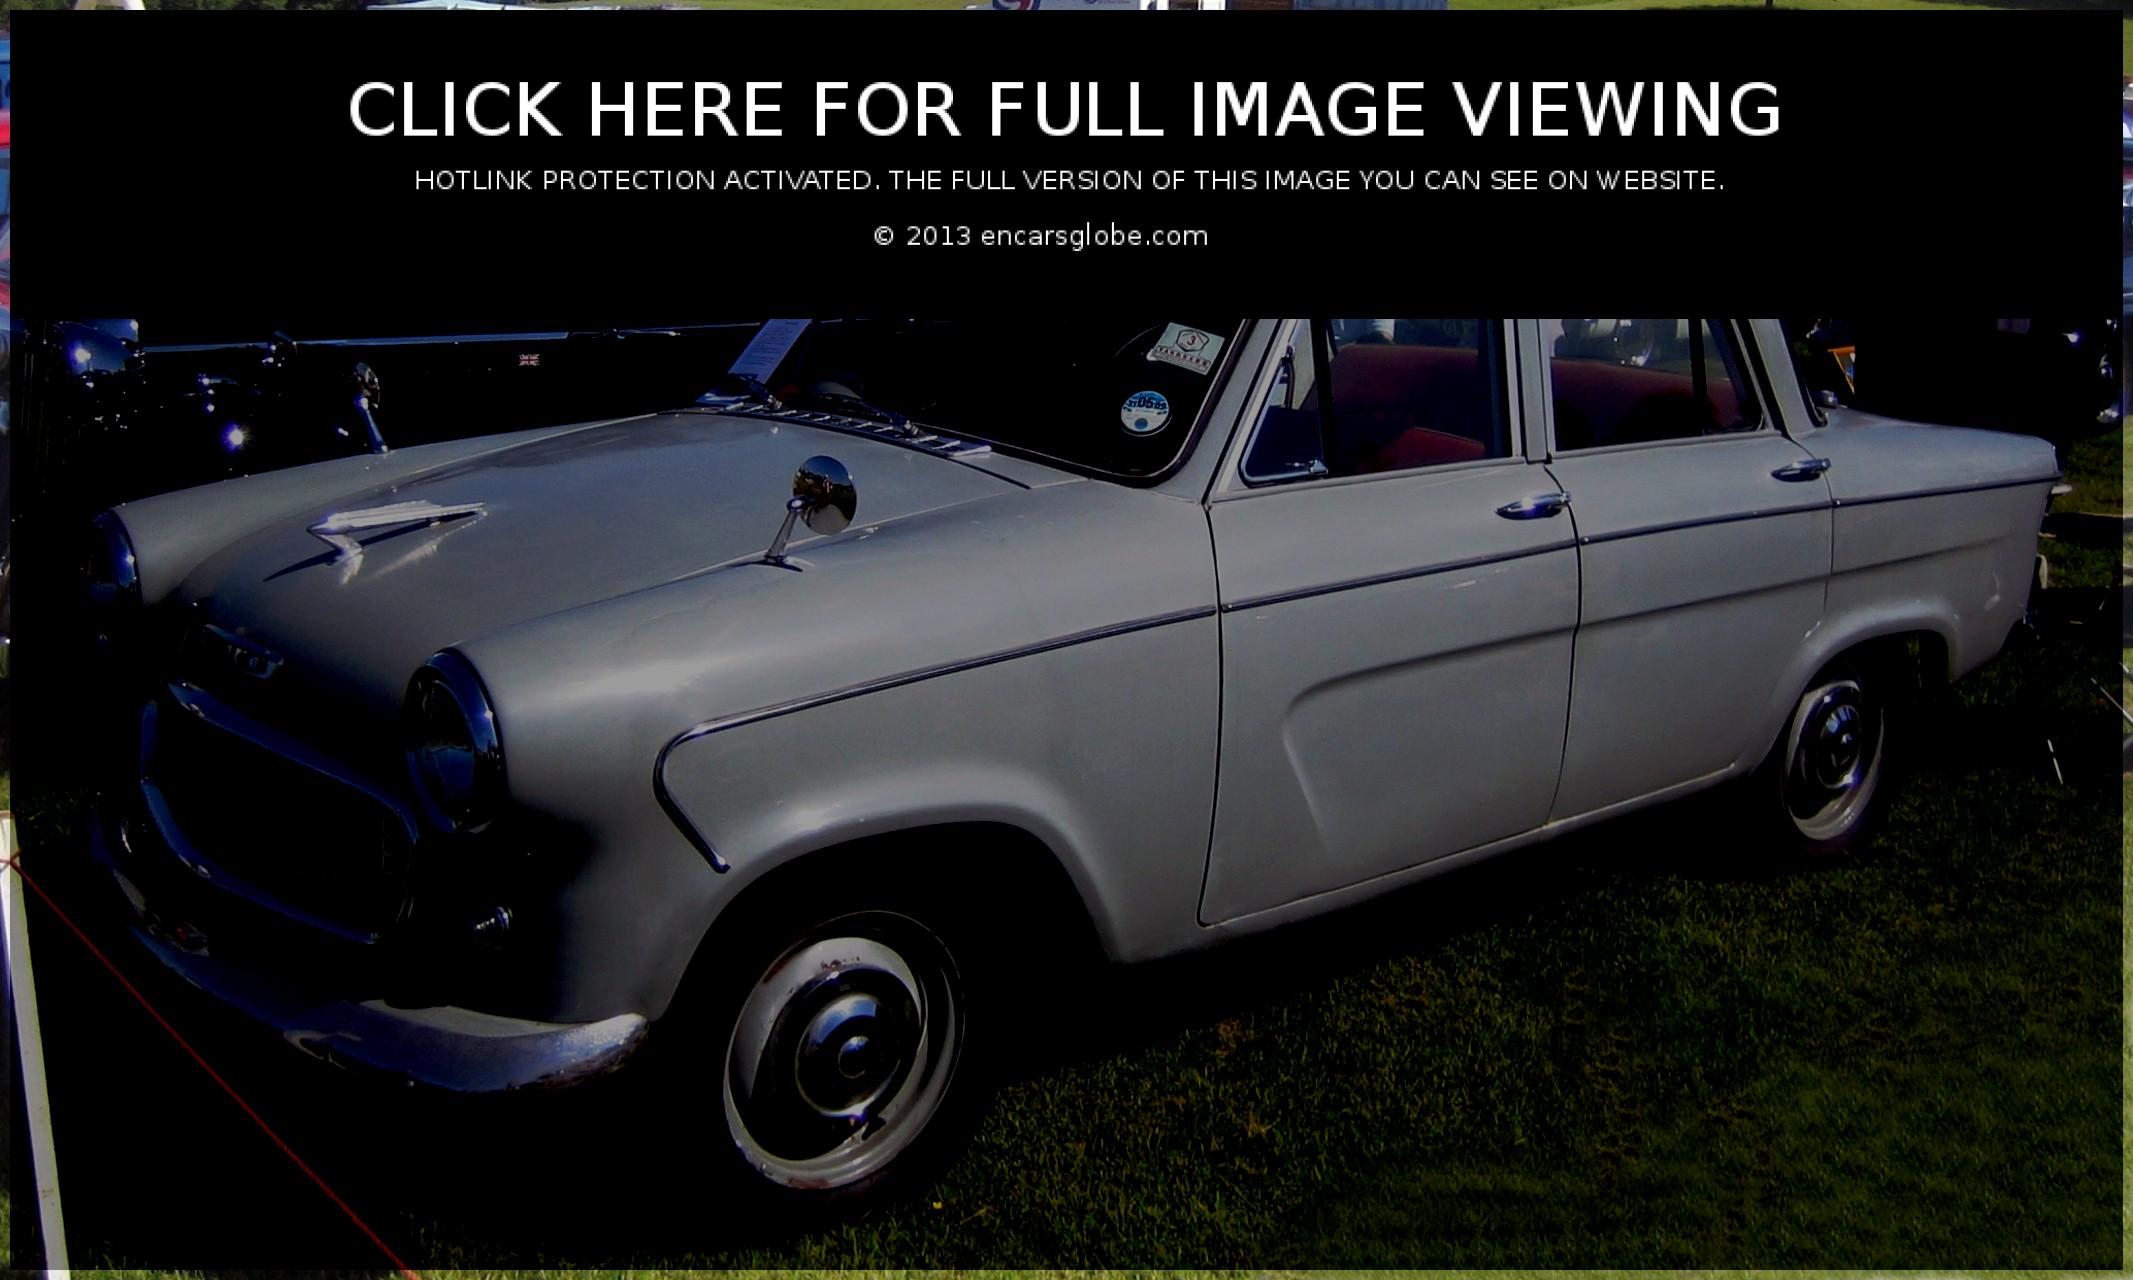 Standard Vanguard Vignale III Photo Gallery: Photo #12 out of 9 ...